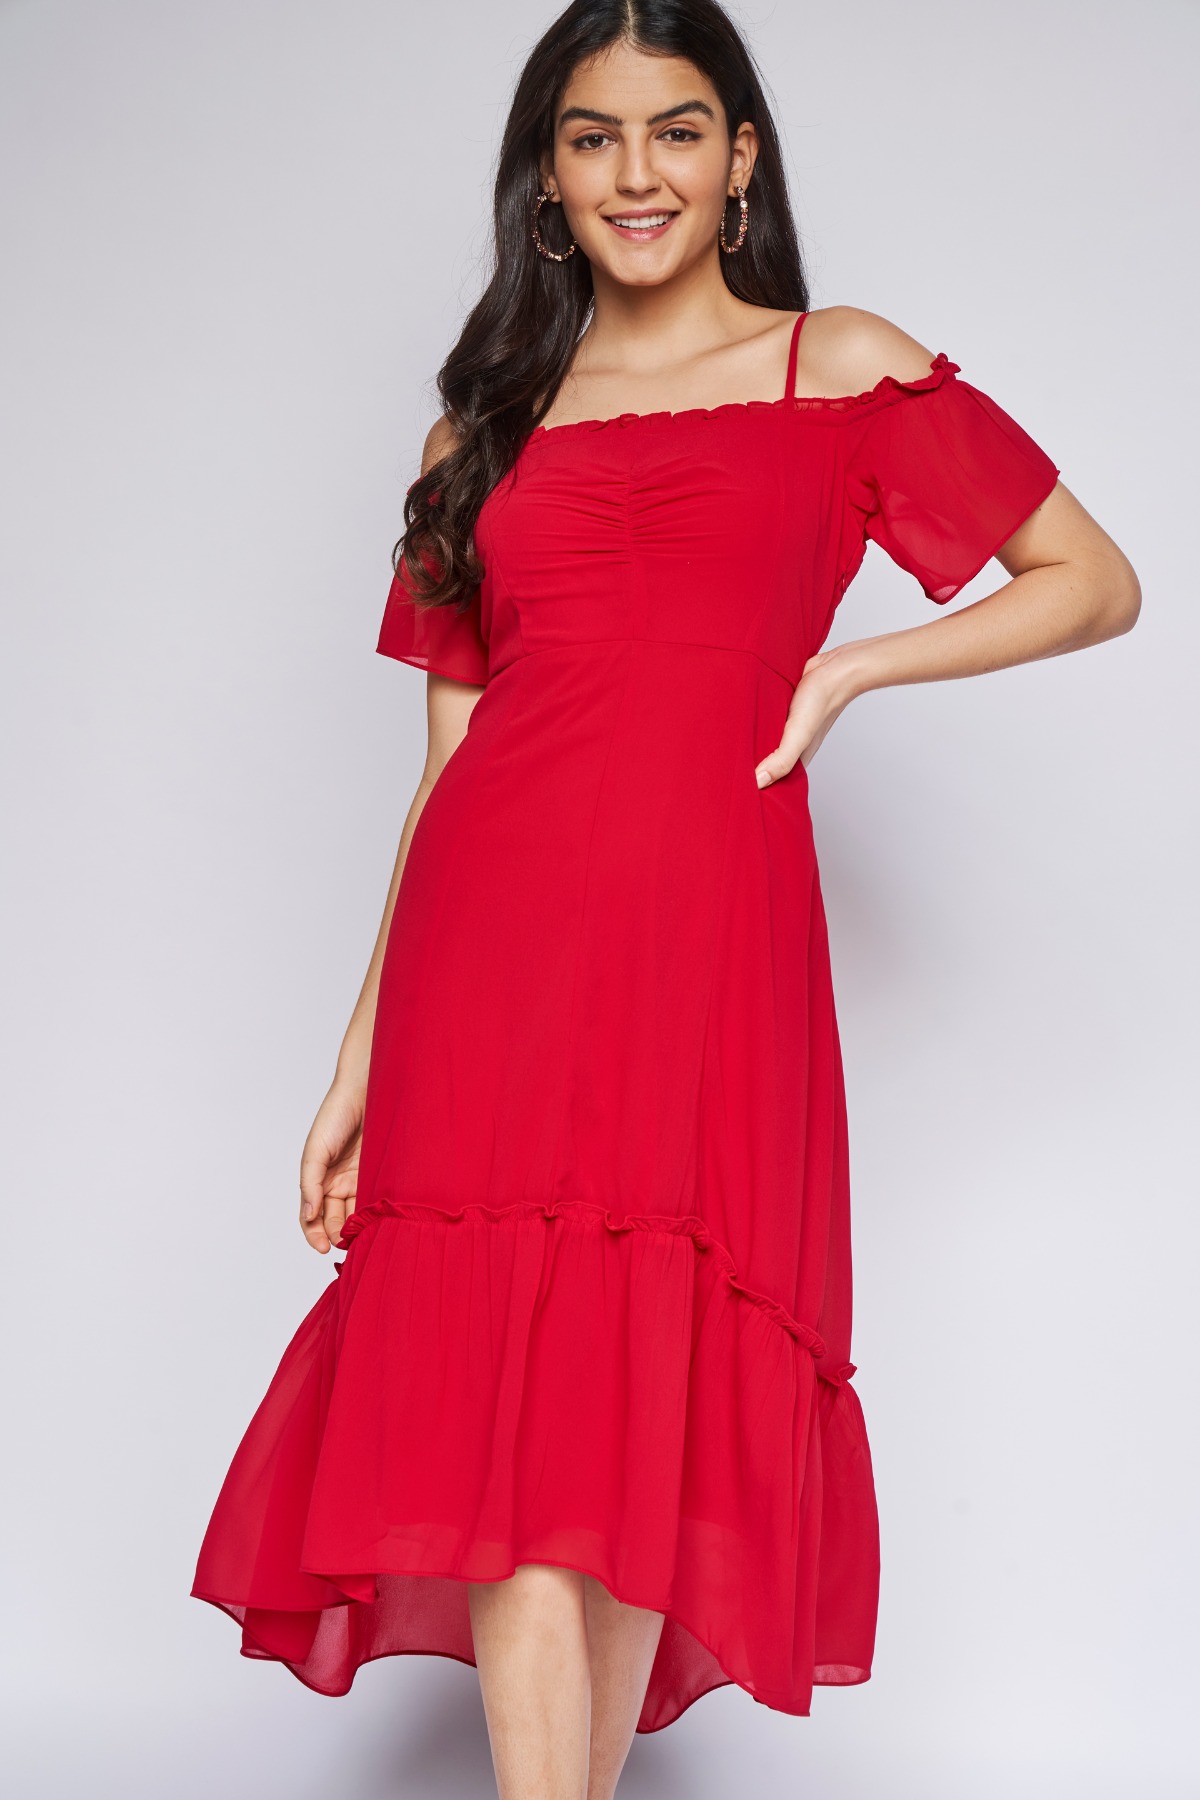 3 - Red Solid Fit & Flare Gown, image 3